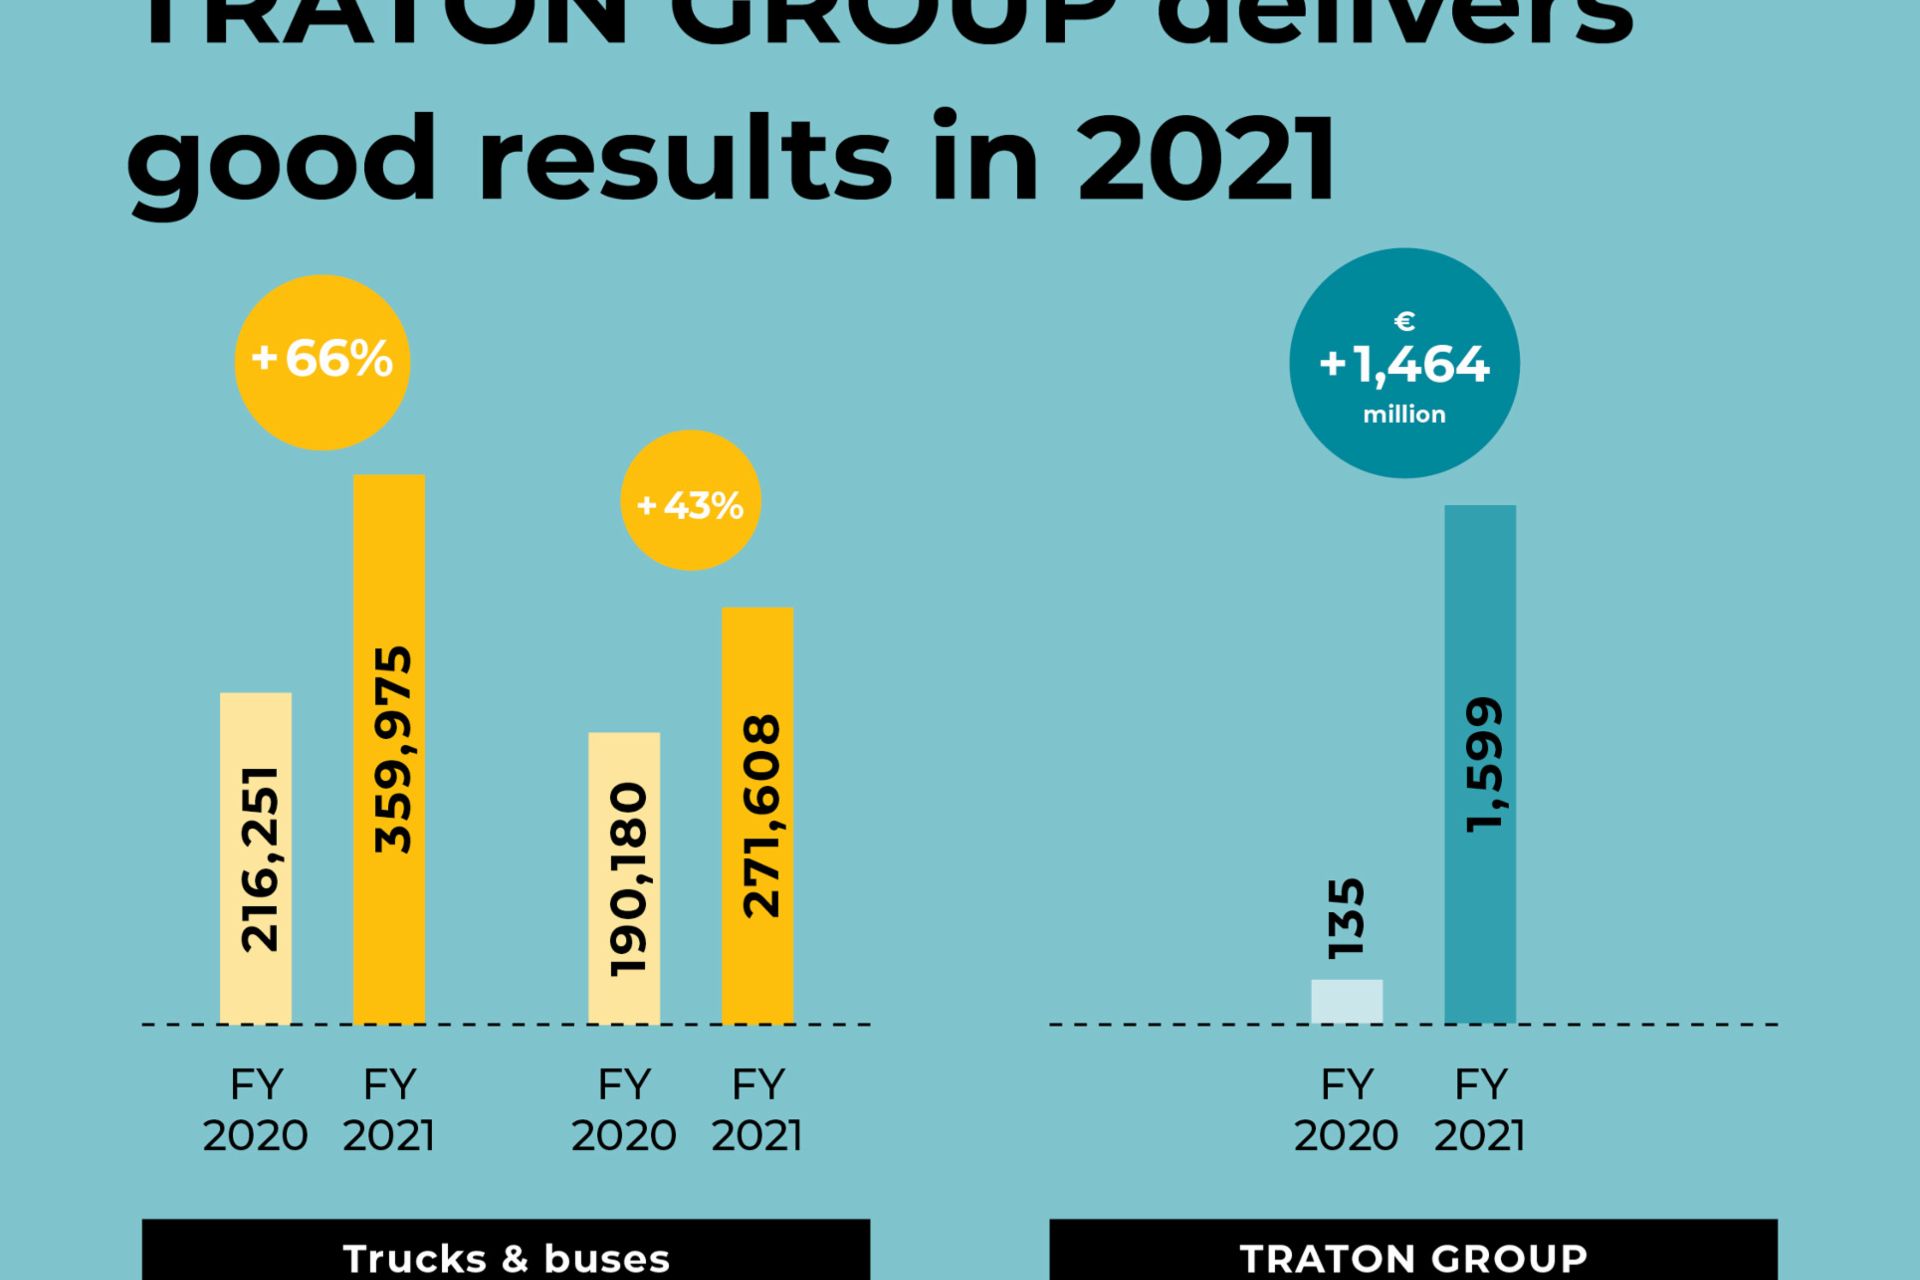 TRATON GROUP delivers good results in 2021 graphic Incoming orders, Unit sales, Operating results adjusted 
                 